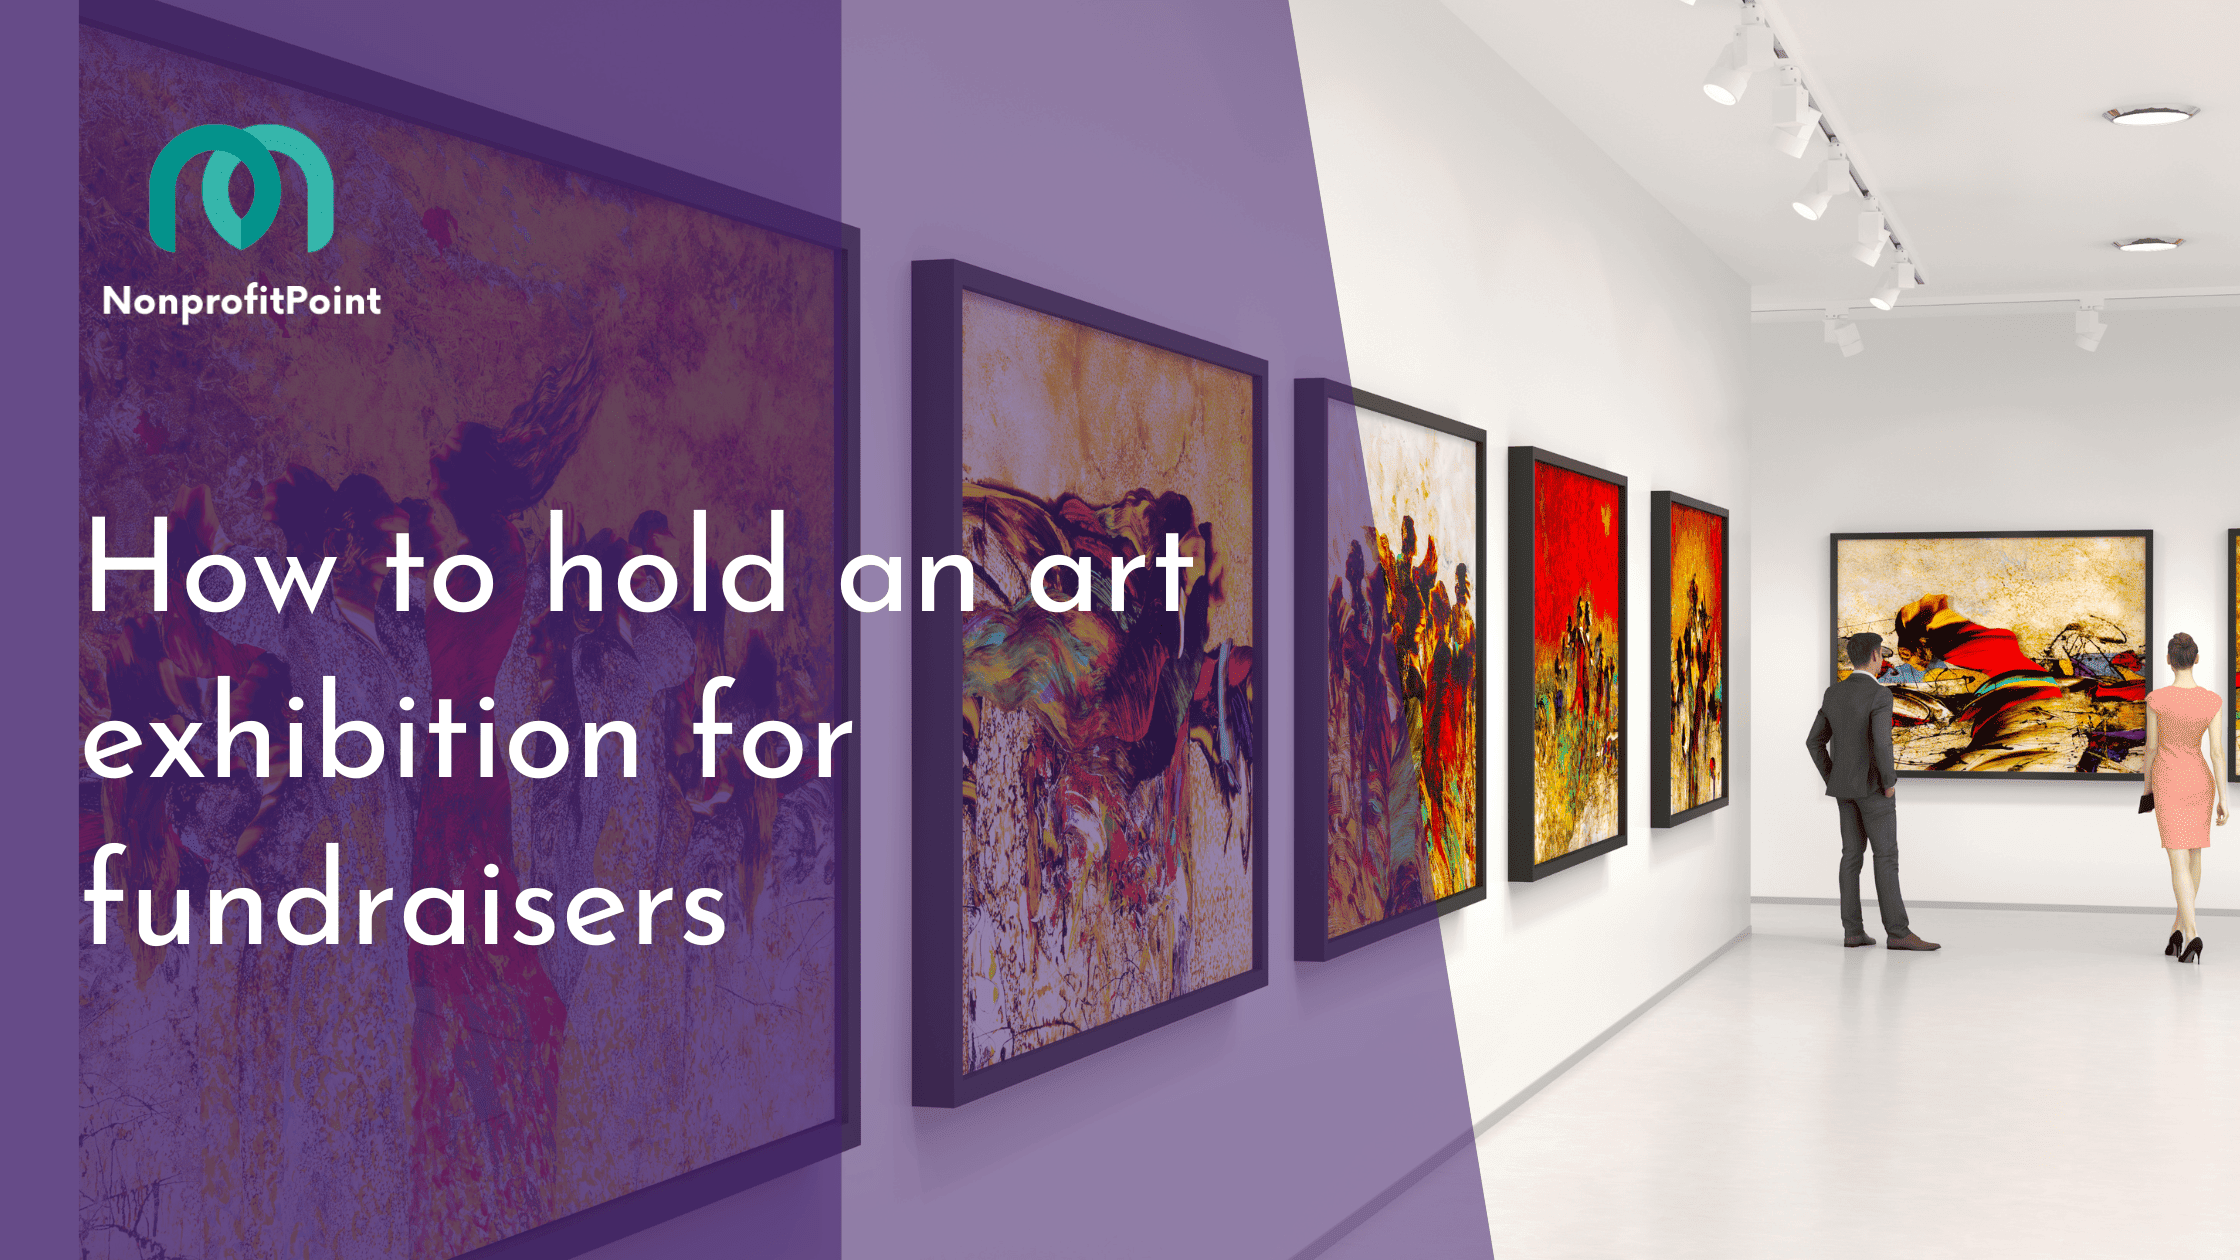 How to hold an art exhibition for fundraiser